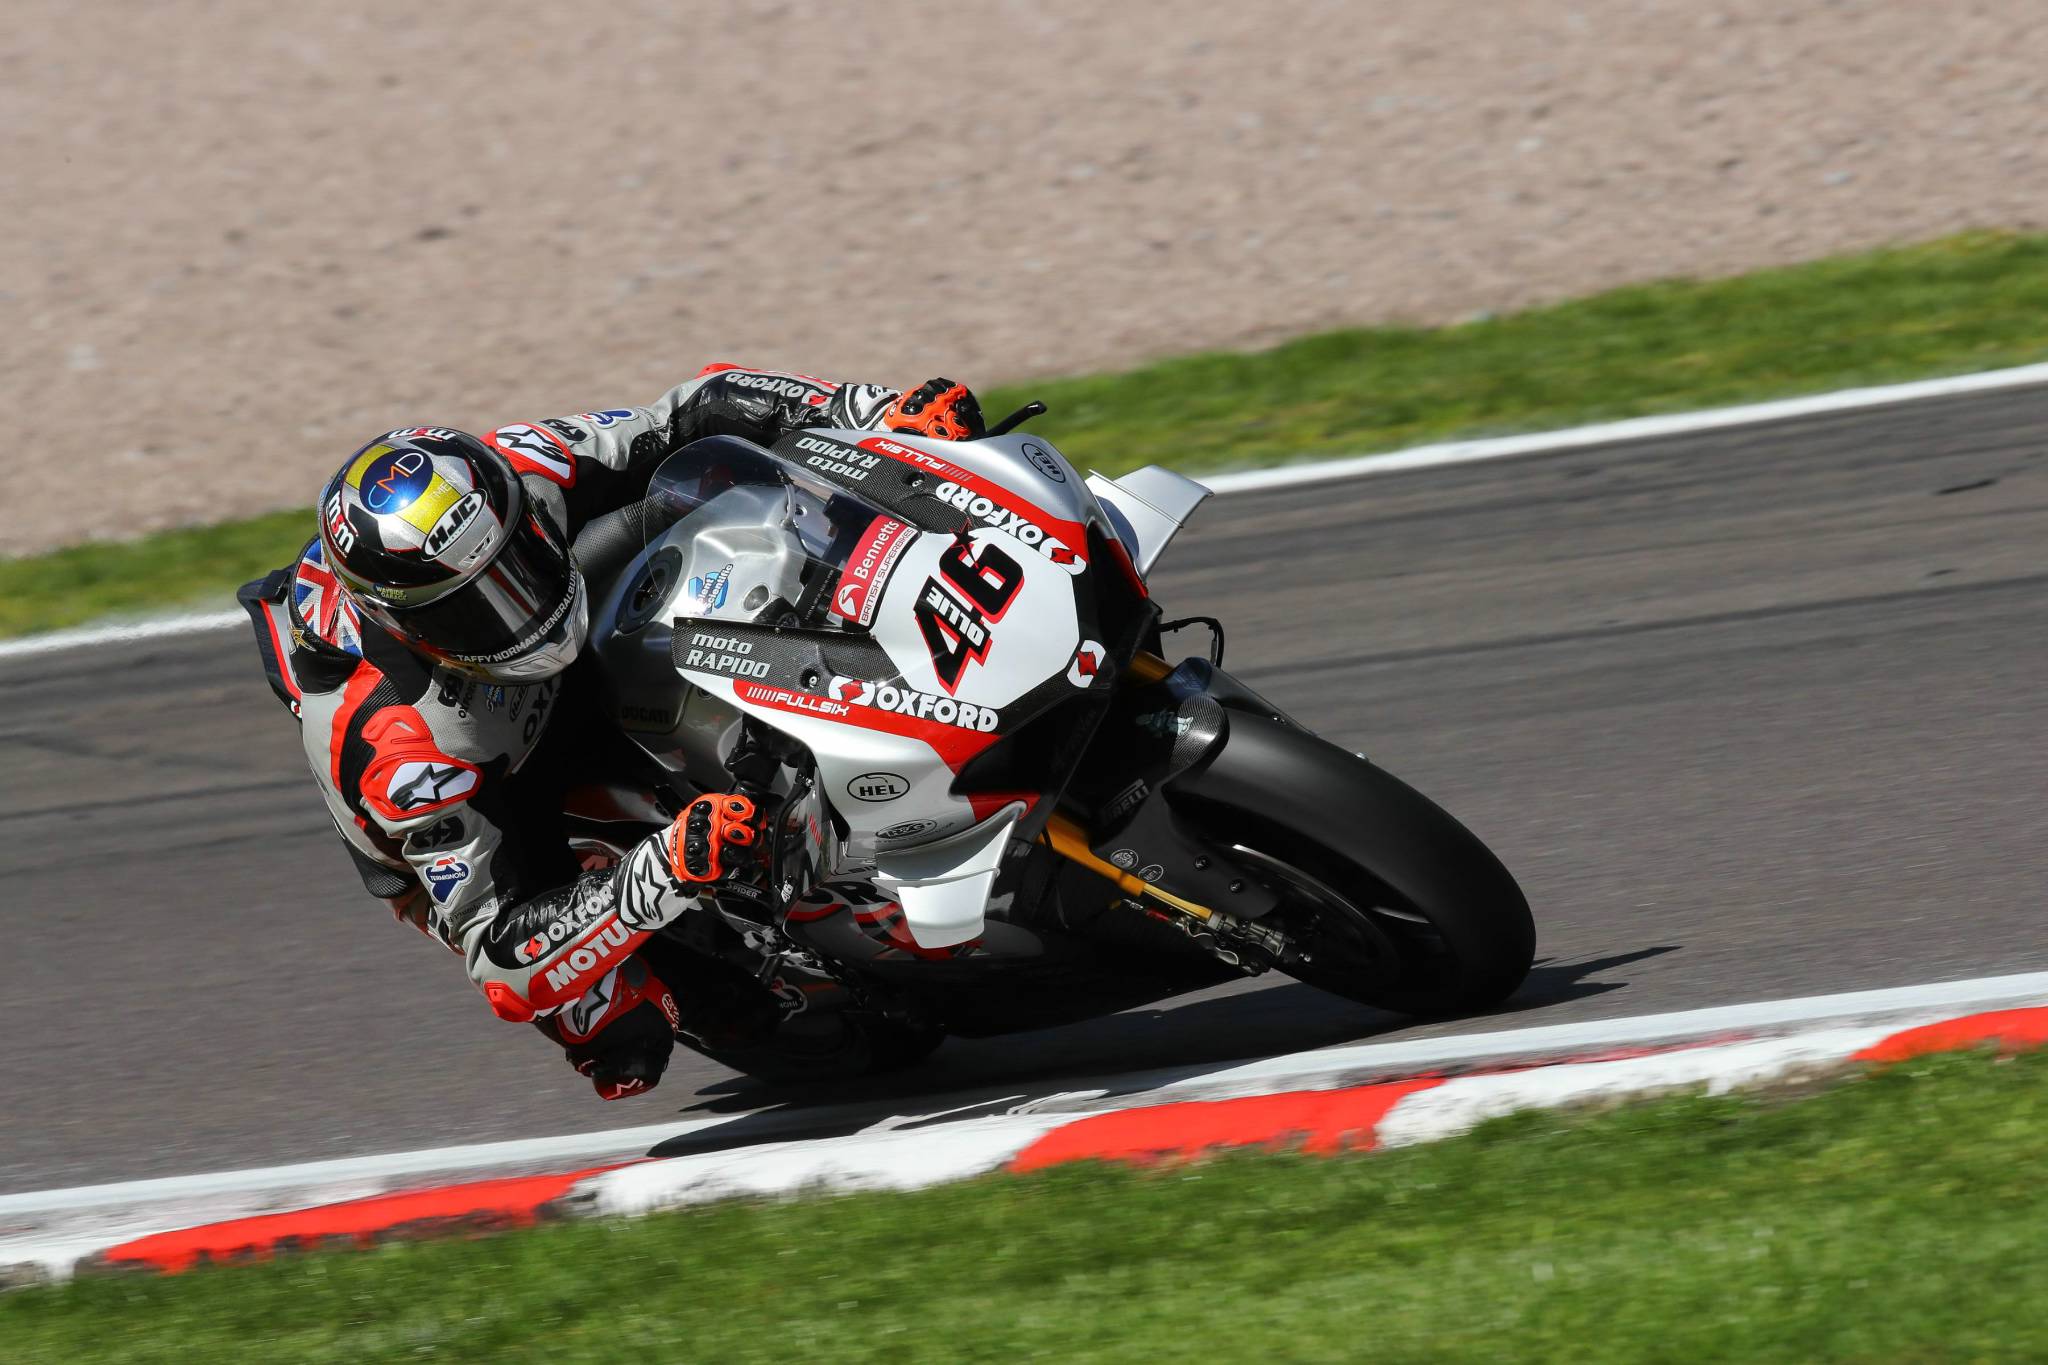 Bridewell on WorldSBK shot: Not many would do what I did!